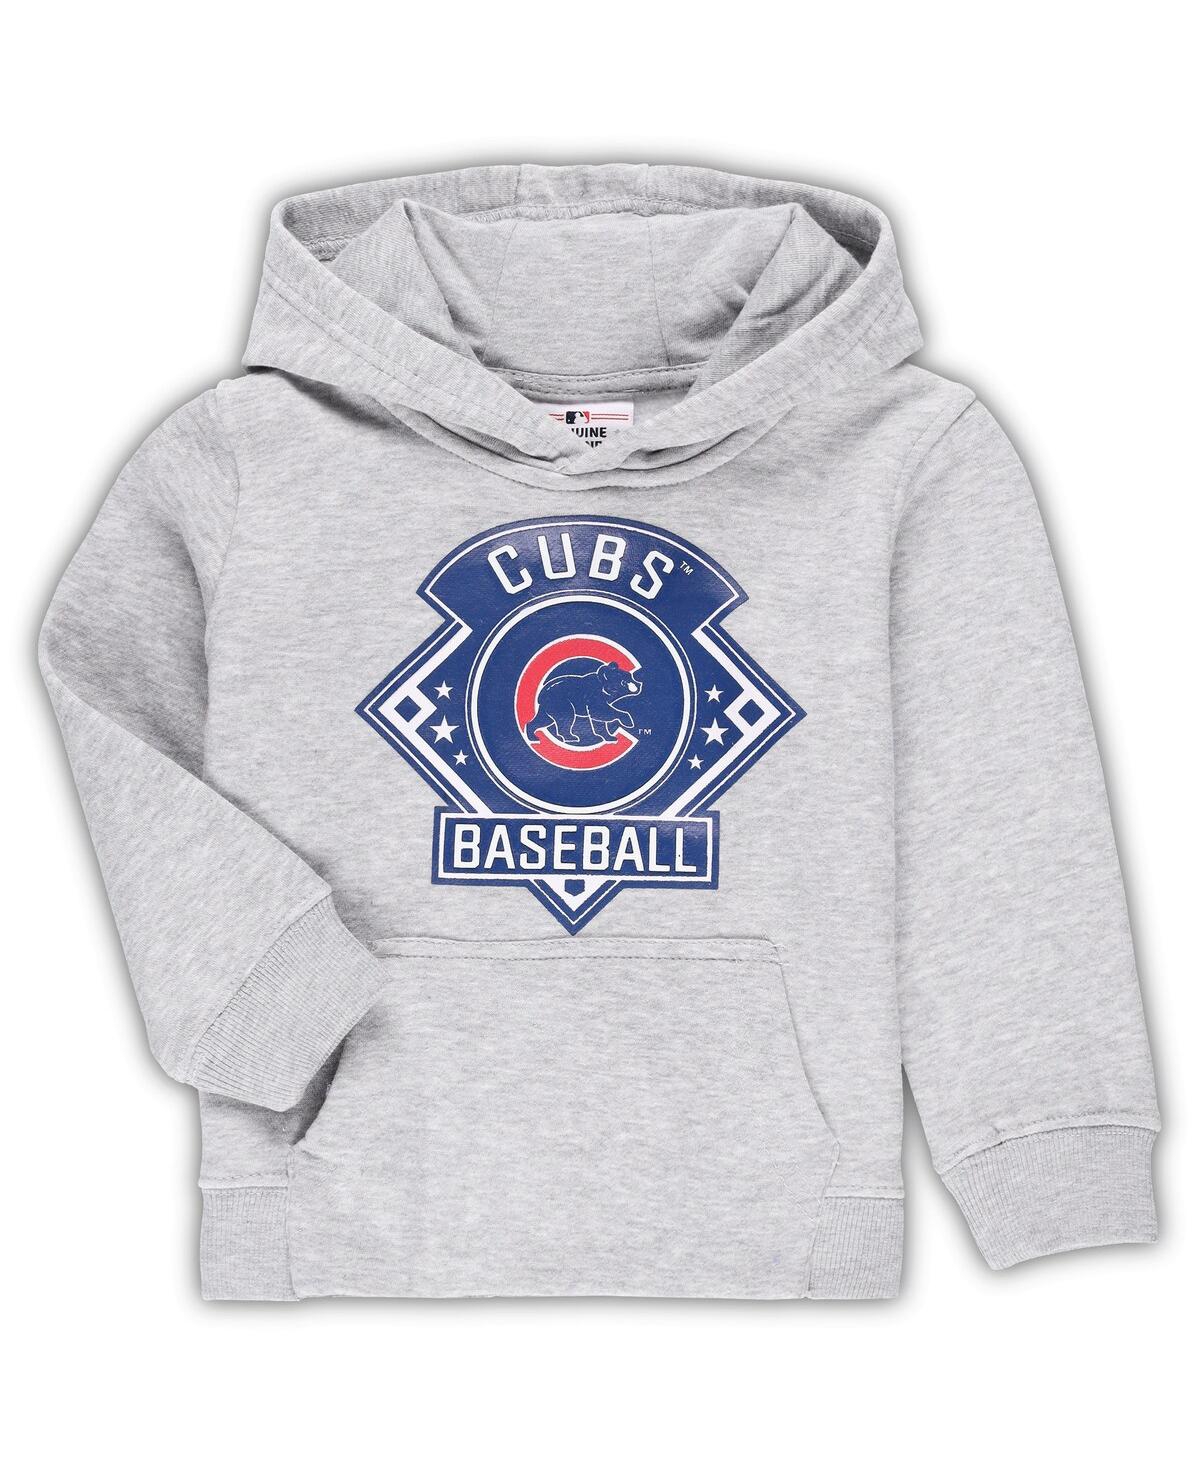 Outerstuff Babies' Toddler Boys And Girls Heather Gray Chicago Cubs Fence Swinger Pullover Hoodie